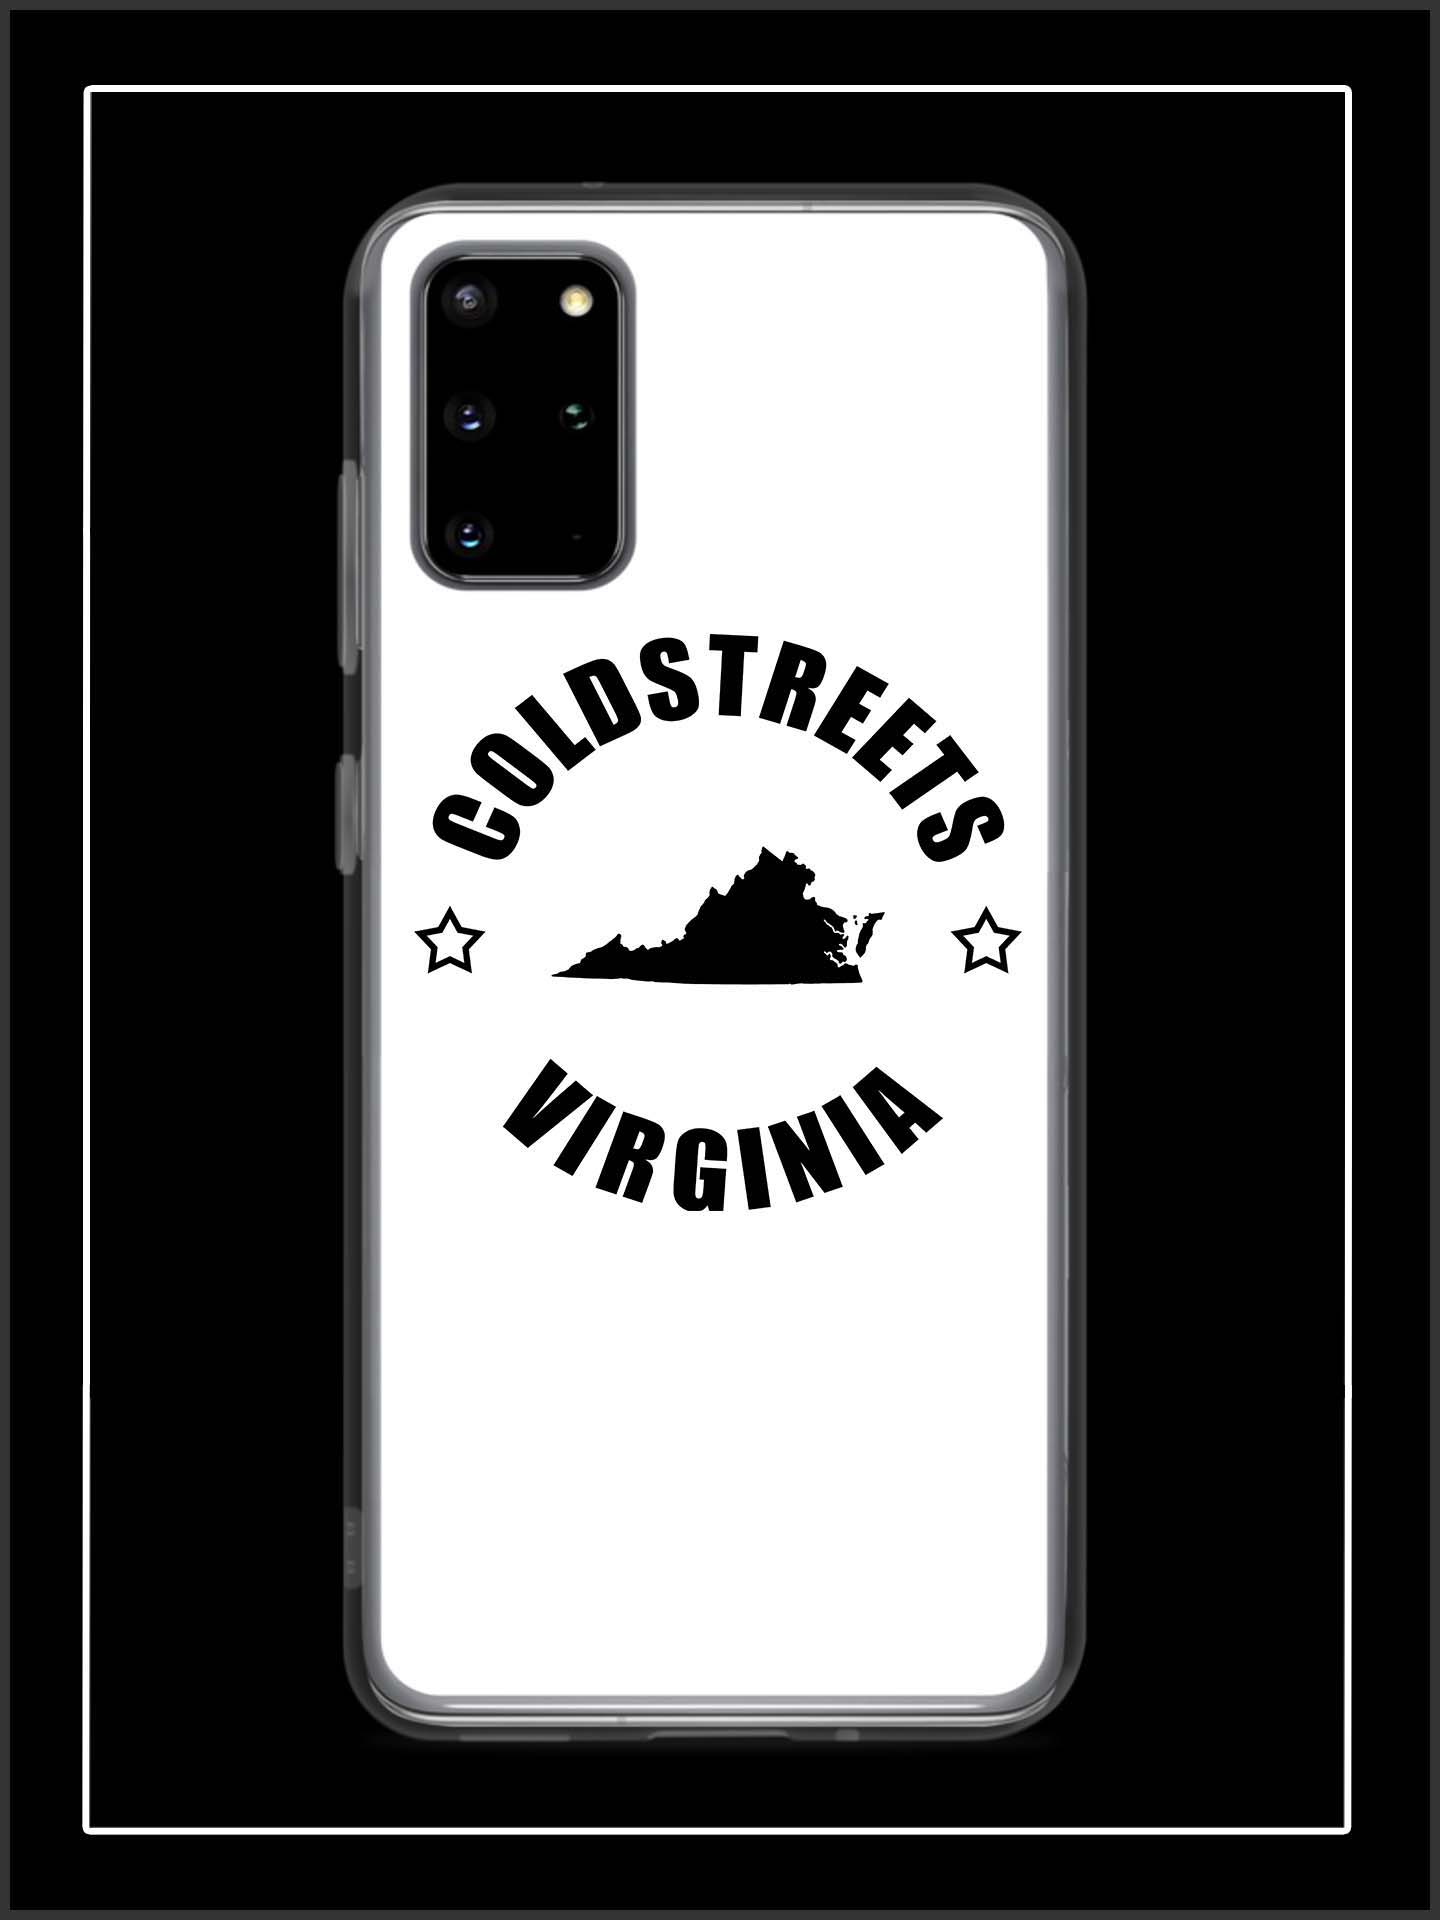 Cold Streets Virginia Samsung Cases